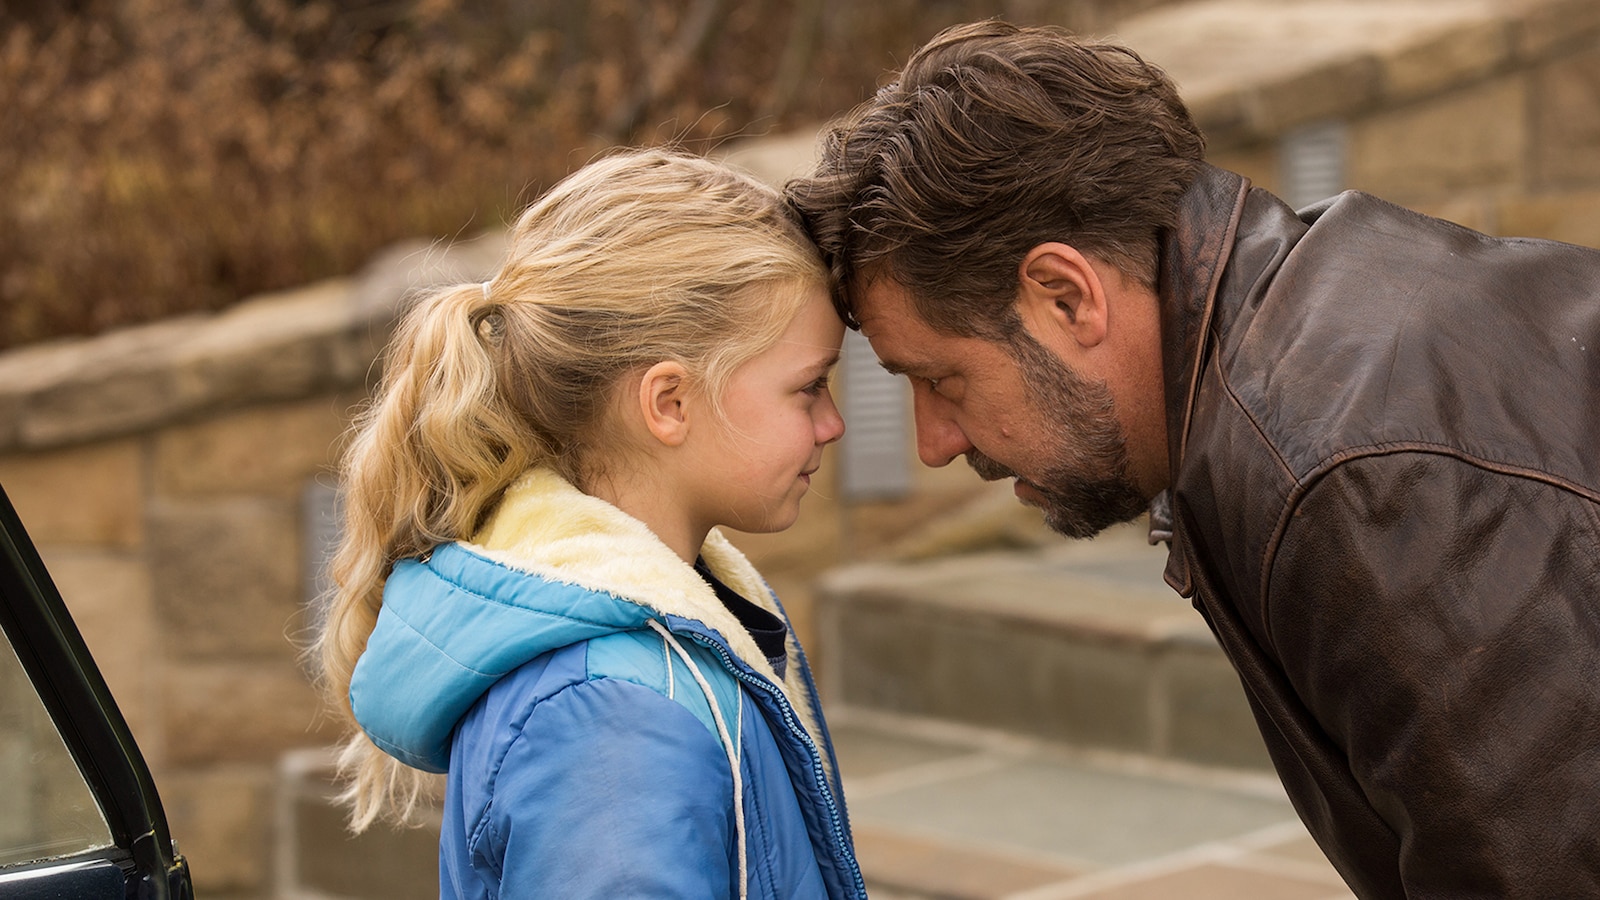 fathers-and-daughters-2015